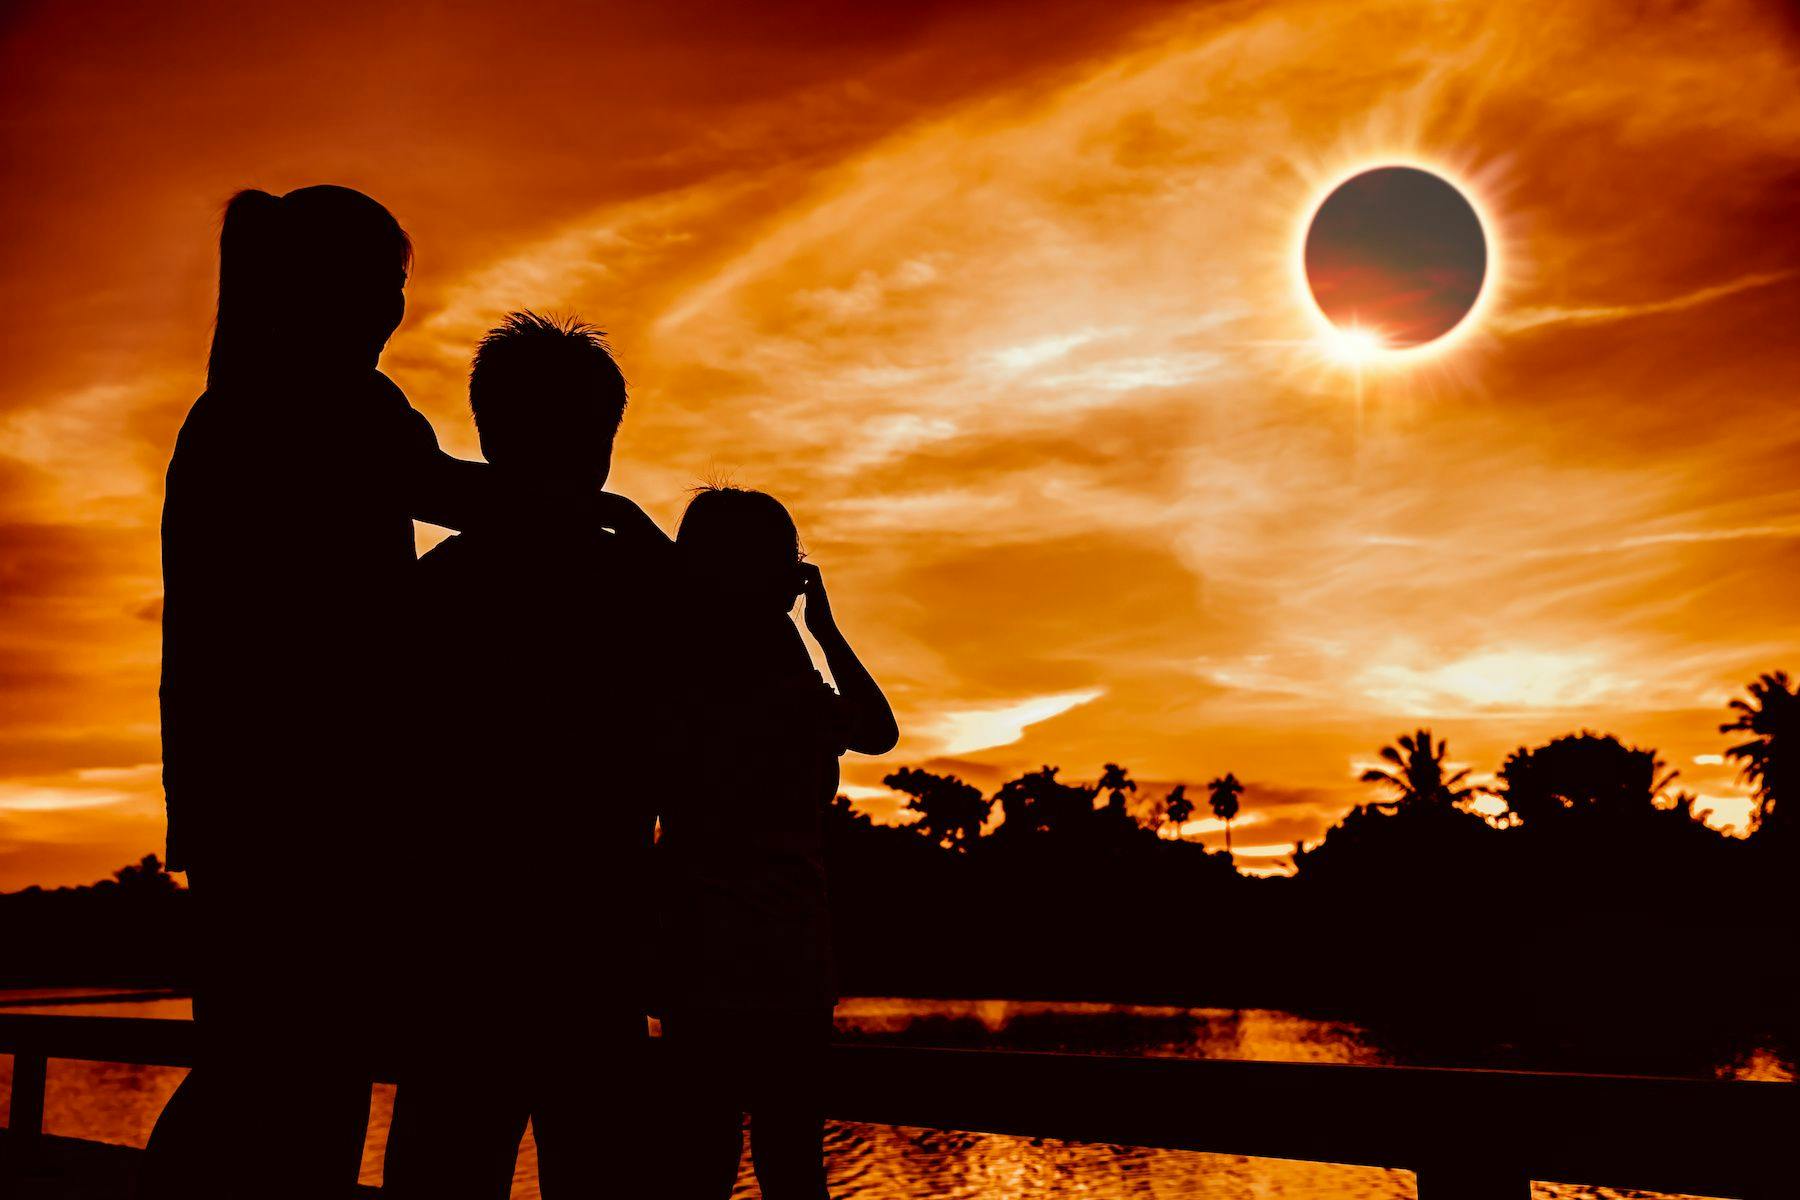 Family safely viewing a total solar eclipse | image credit: kdshutterman / stock.adobe.com